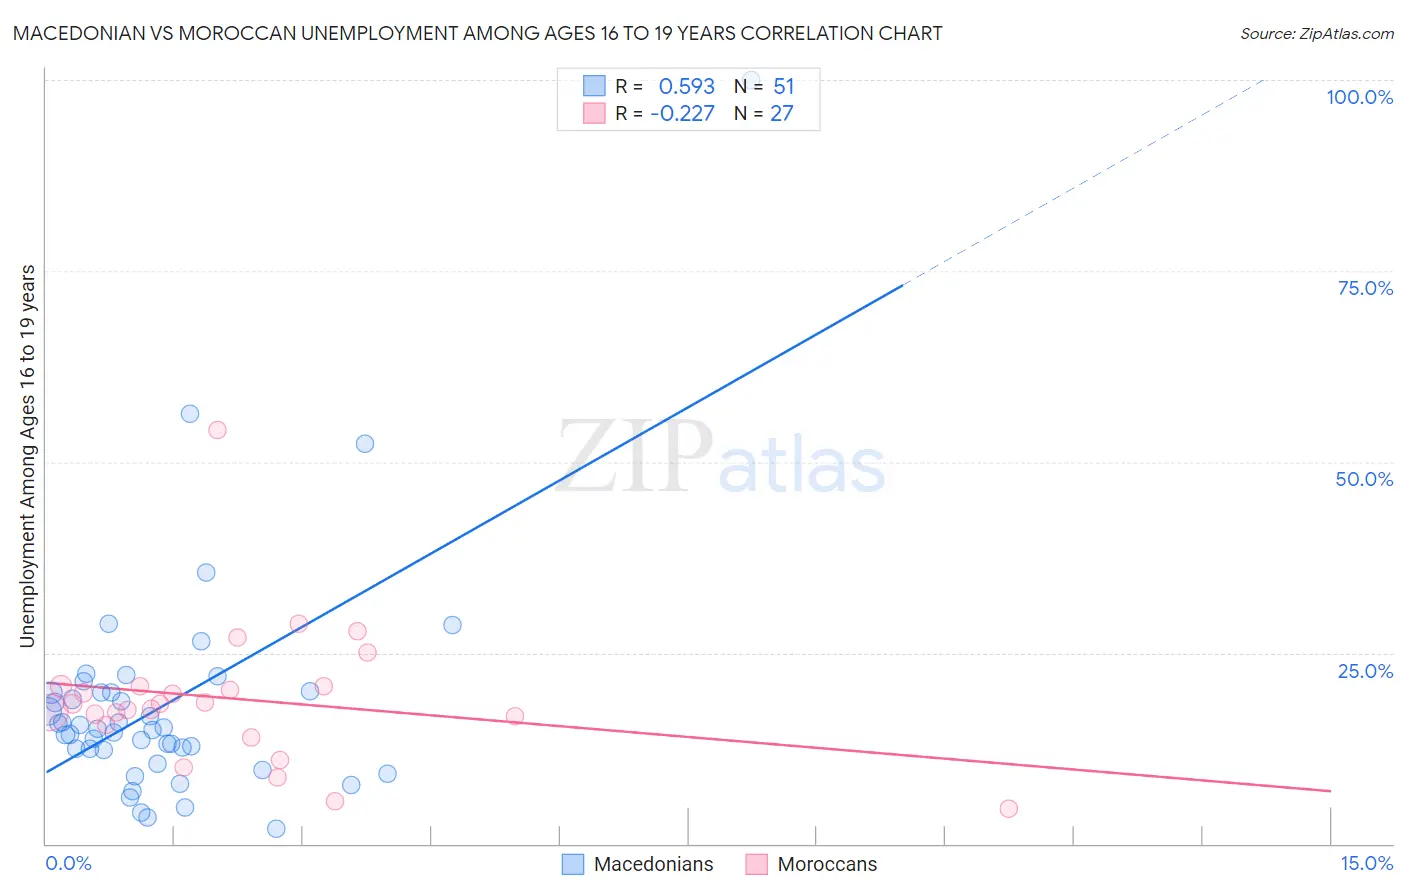 Macedonian vs Moroccan Unemployment Among Ages 16 to 19 years